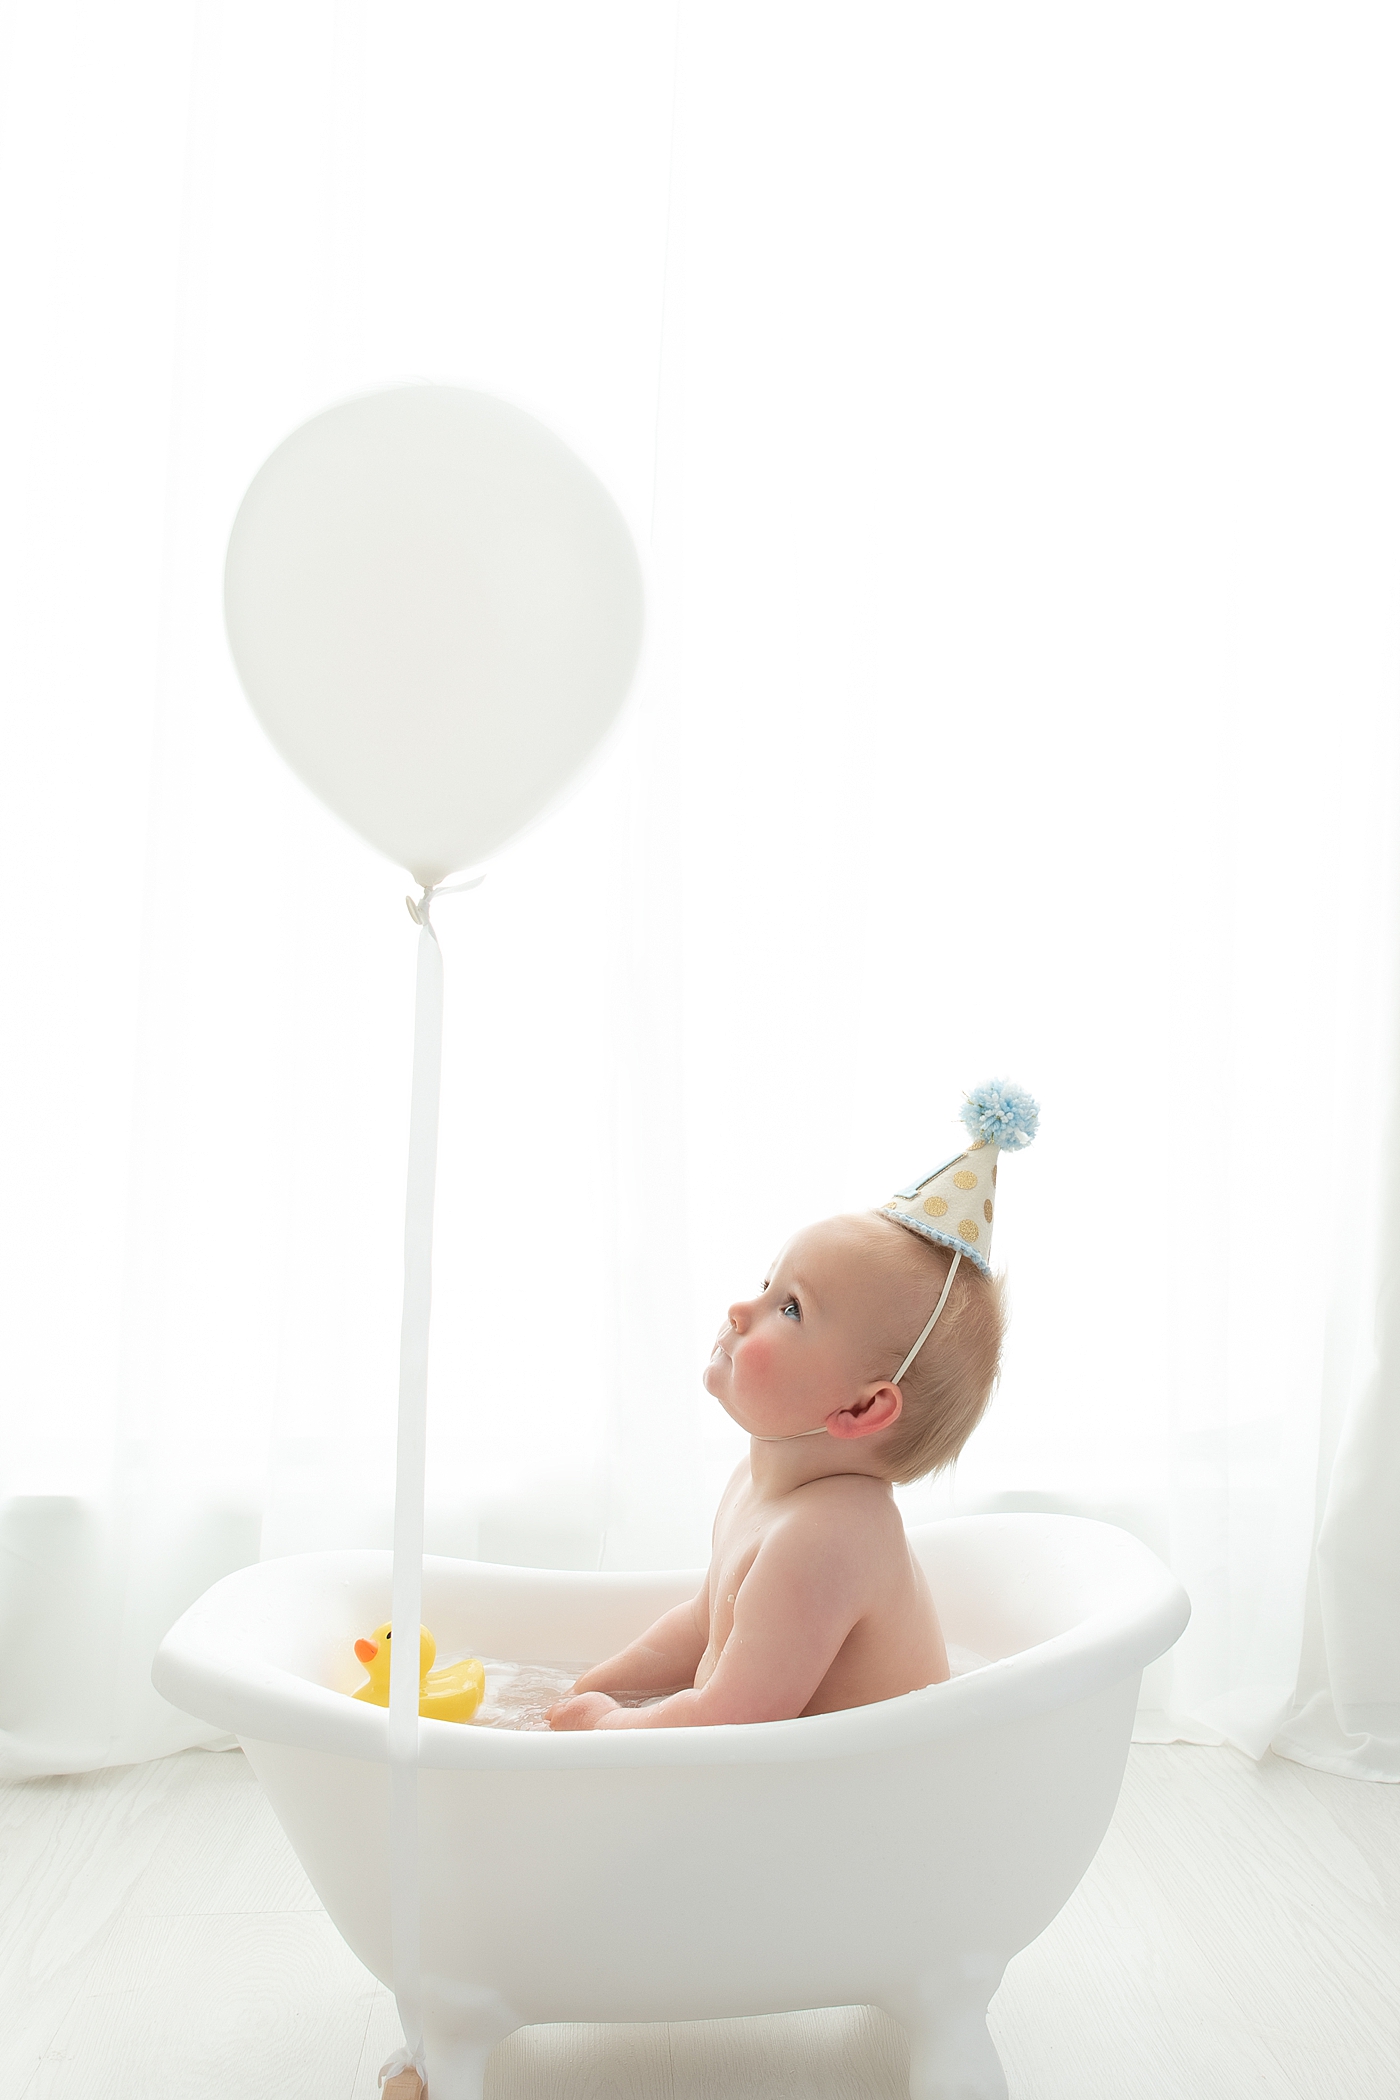 Bubble bath at the end of a cake smash session for one year old. Photo by Rachel Brookes Photography.